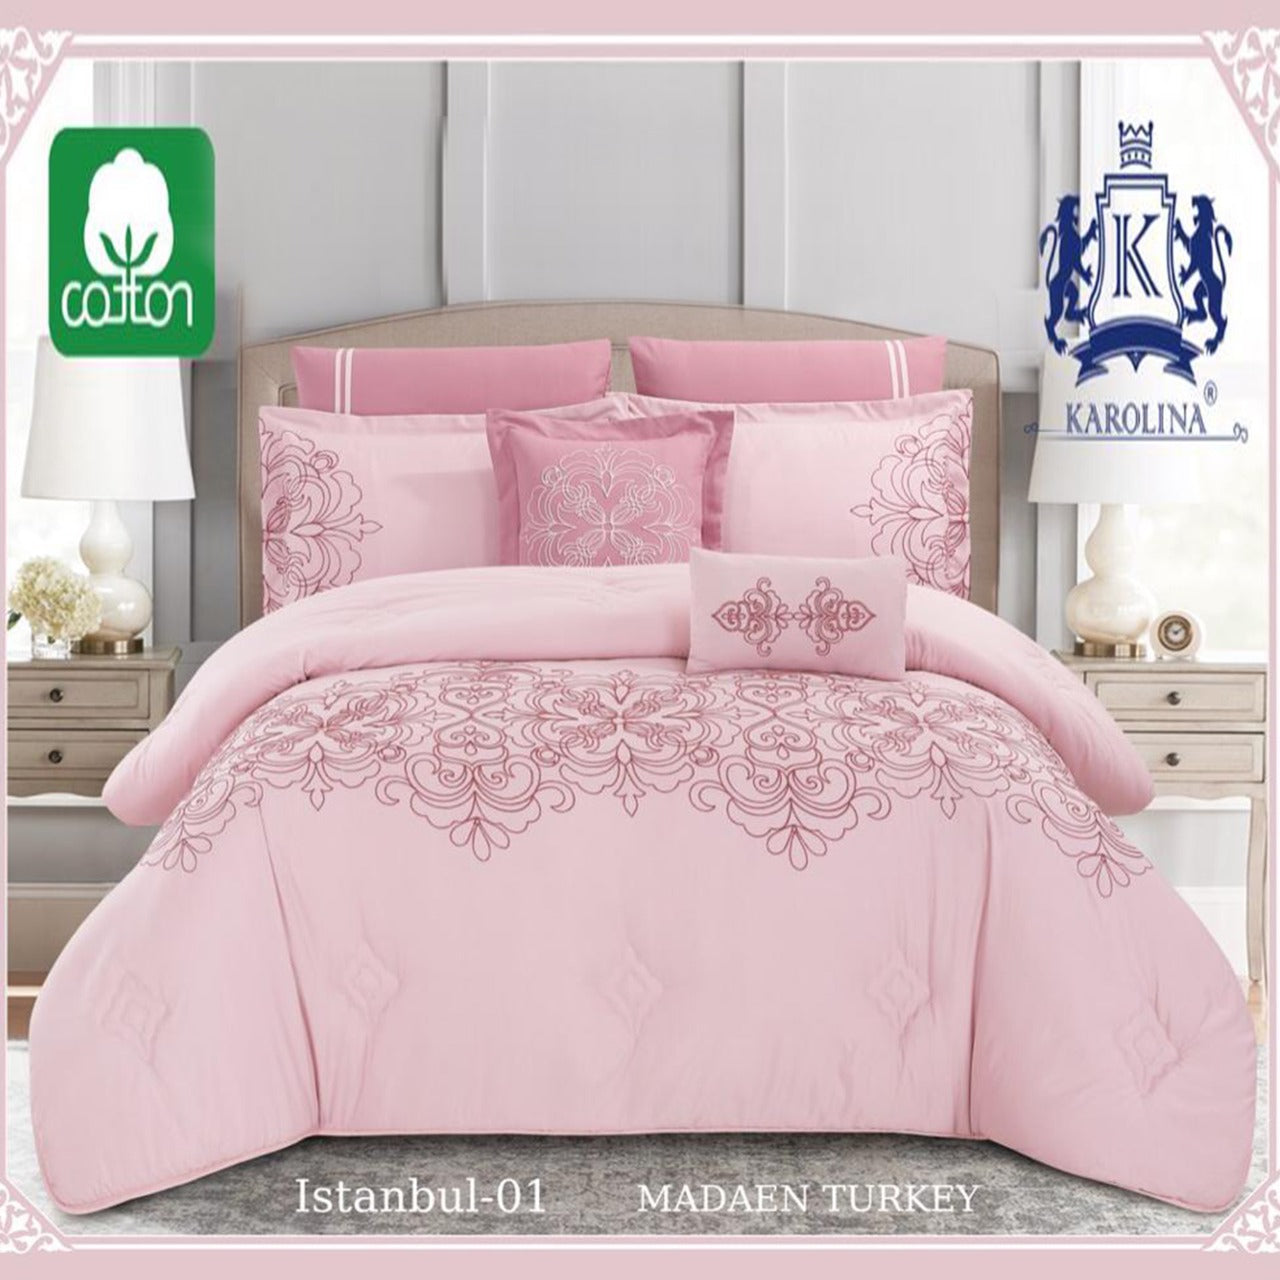 10 Piece Comforter Bedding With Sheet and Decorative Pillow Shams | Made in Turkey Istanbul-01